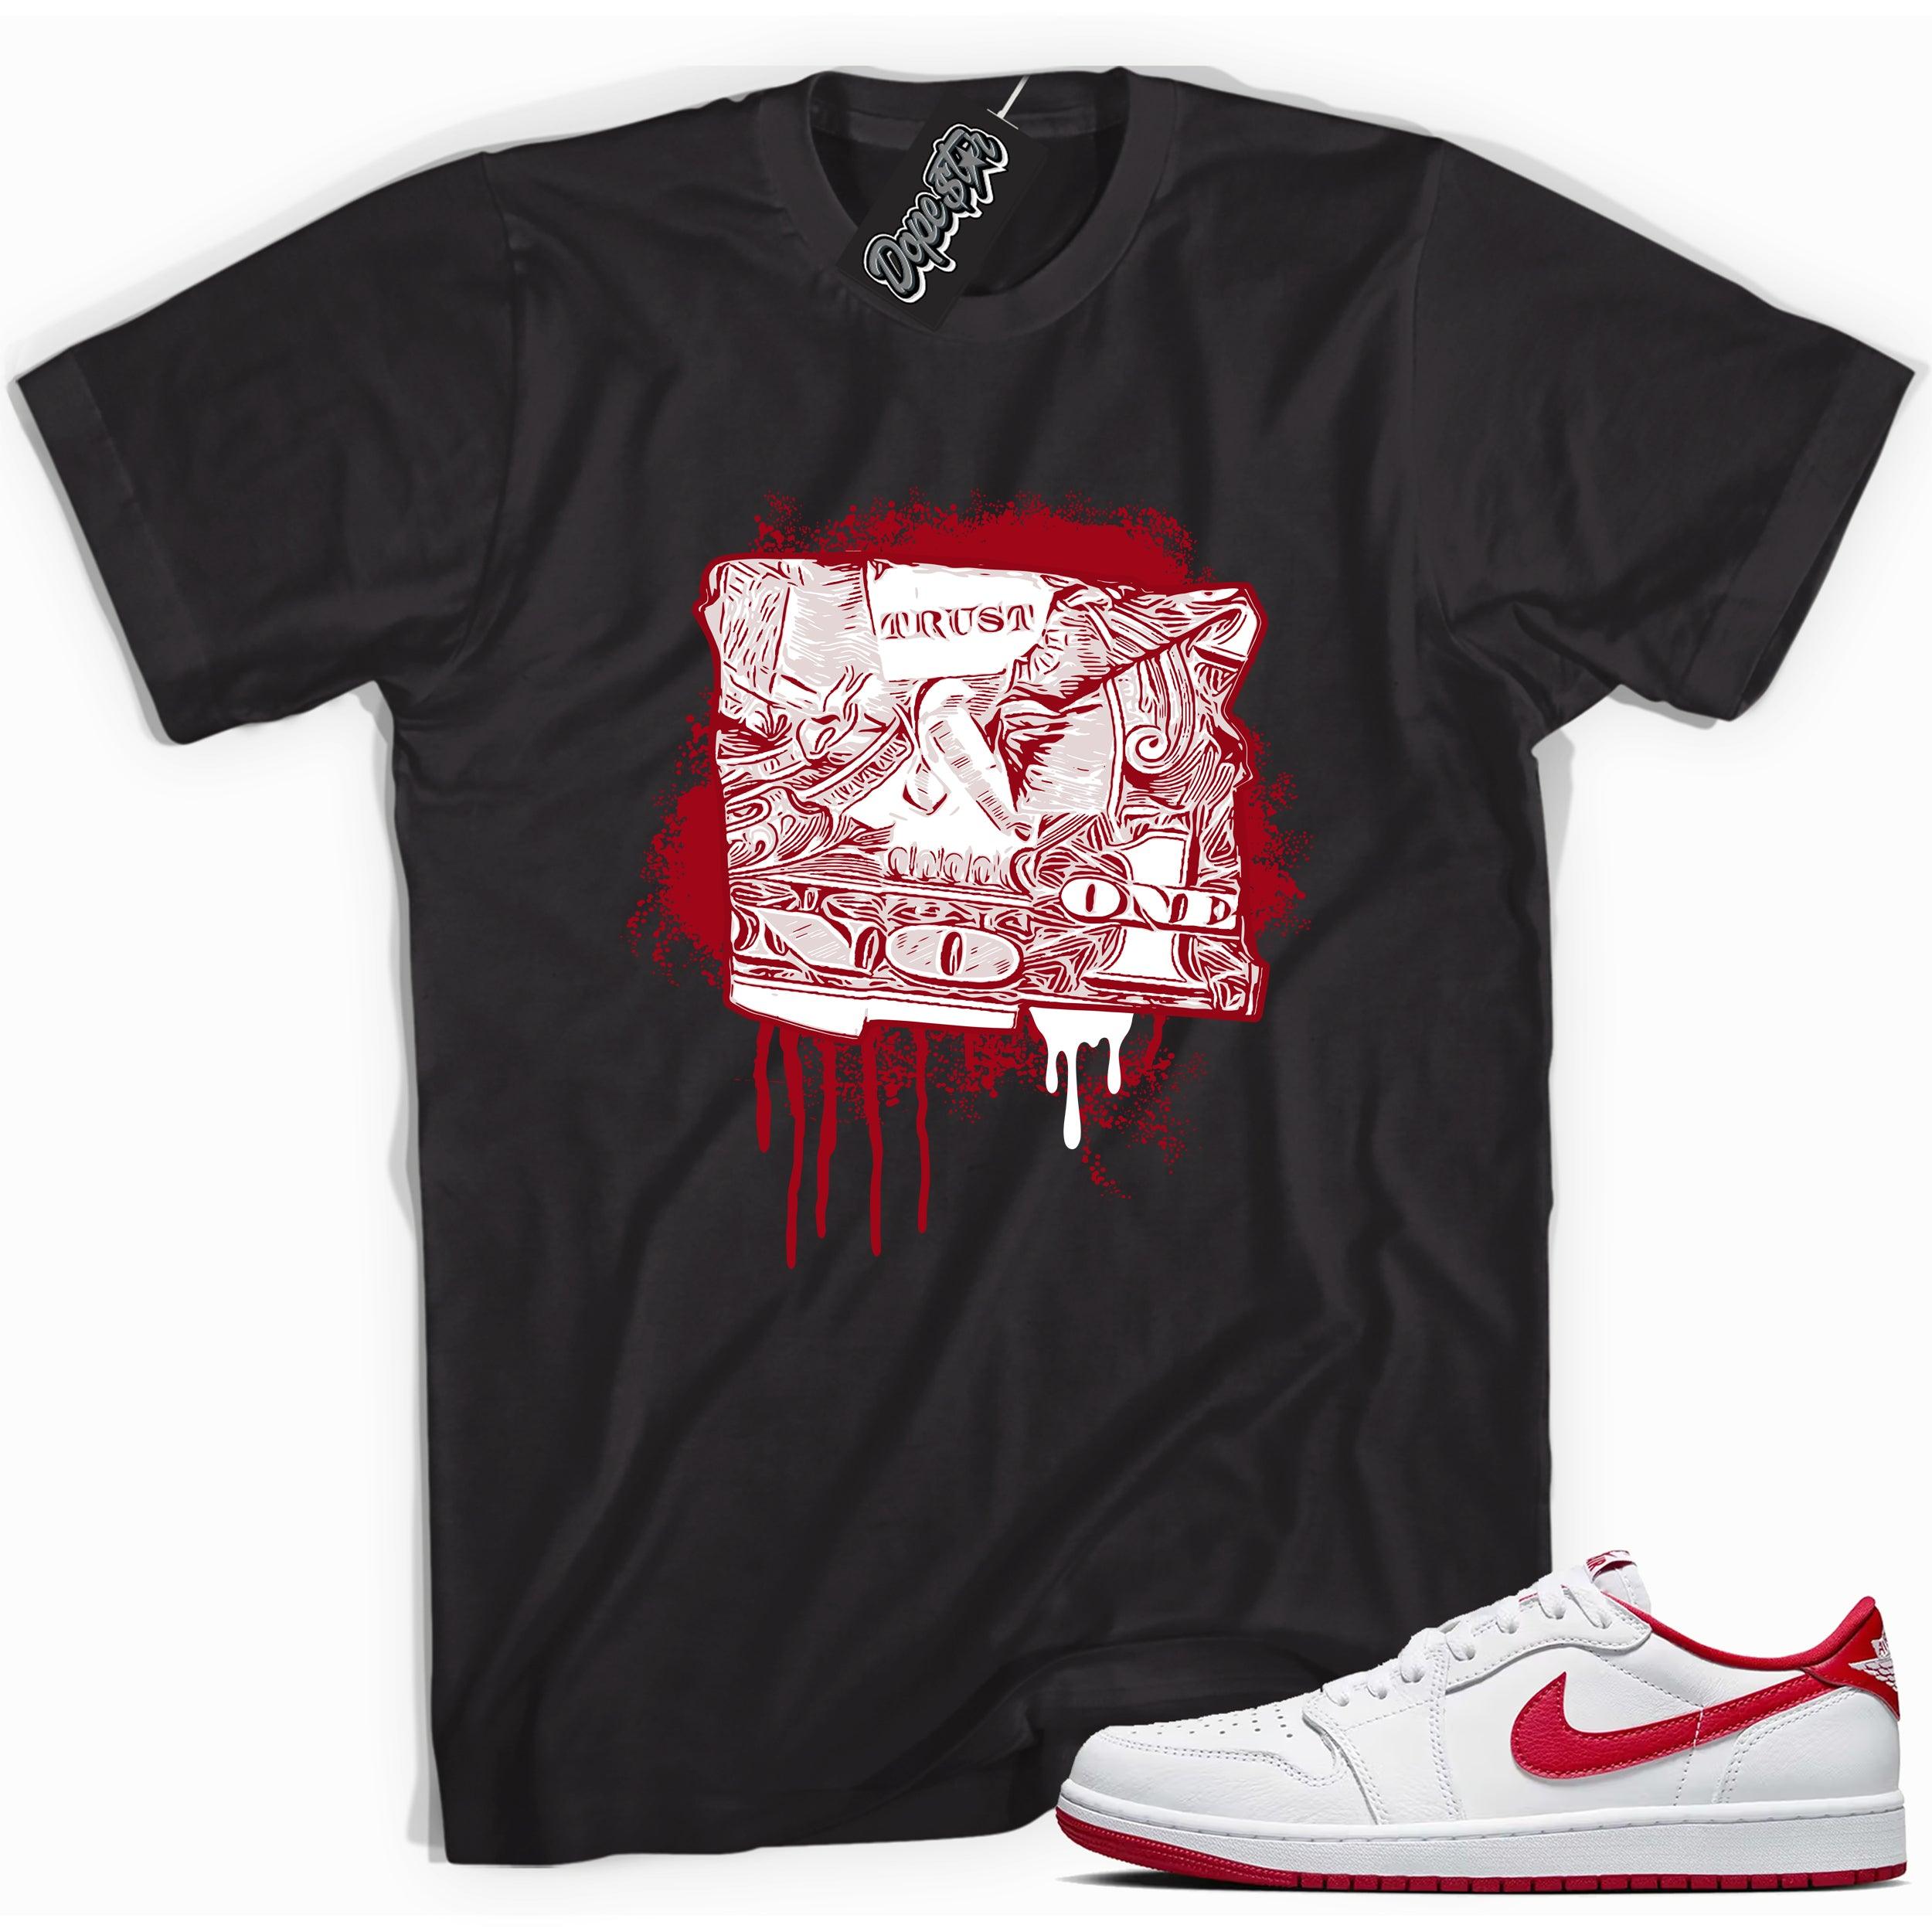 Cool Black graphic tee with “ Trust No One Dollar ” print, that perfectly matches Air Jordan 1 Retro Low OG University Red and white sneakers 